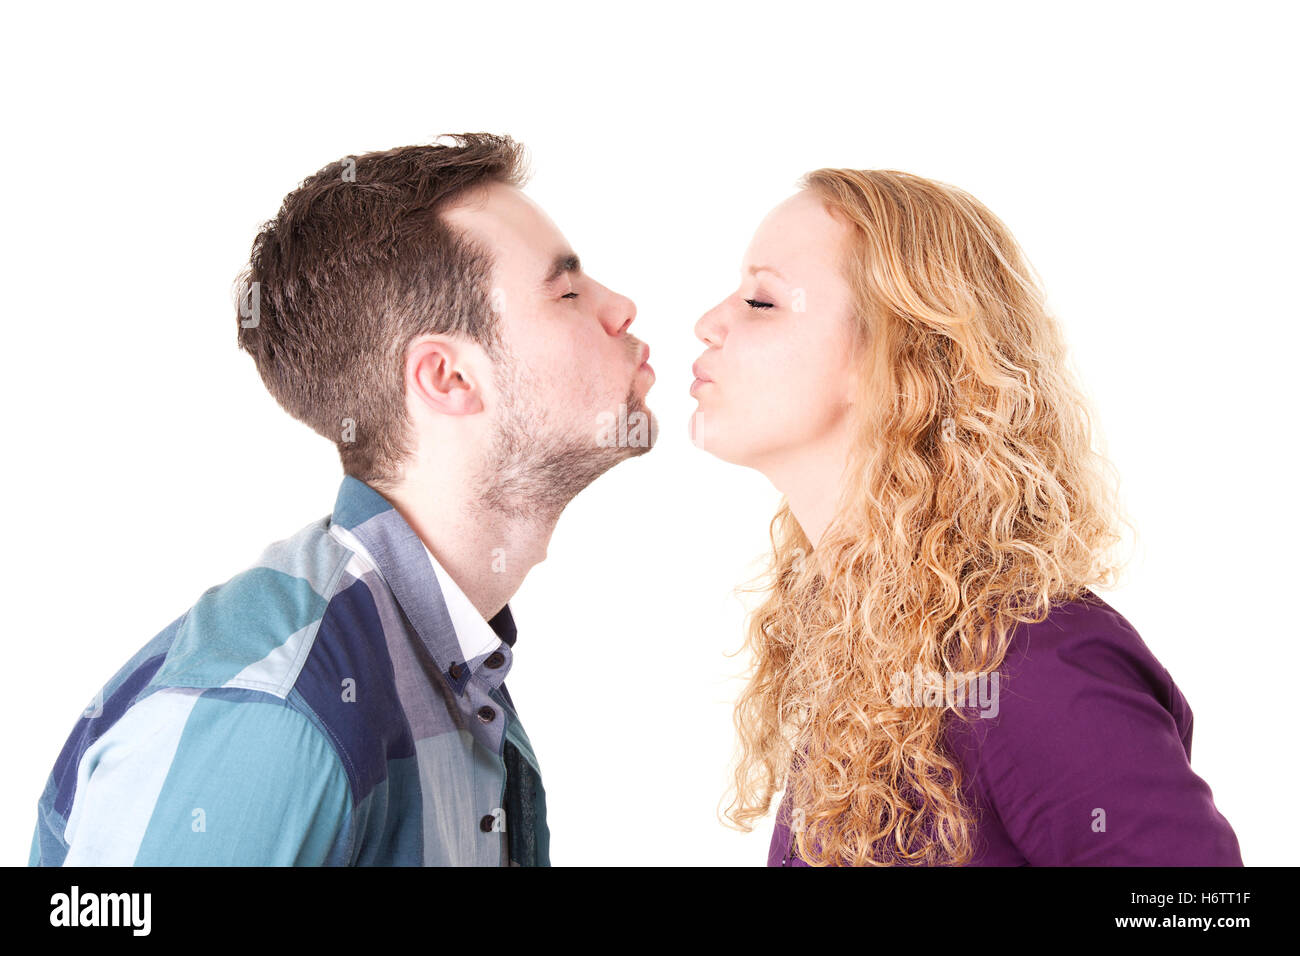 young kissing couple Stock Photo